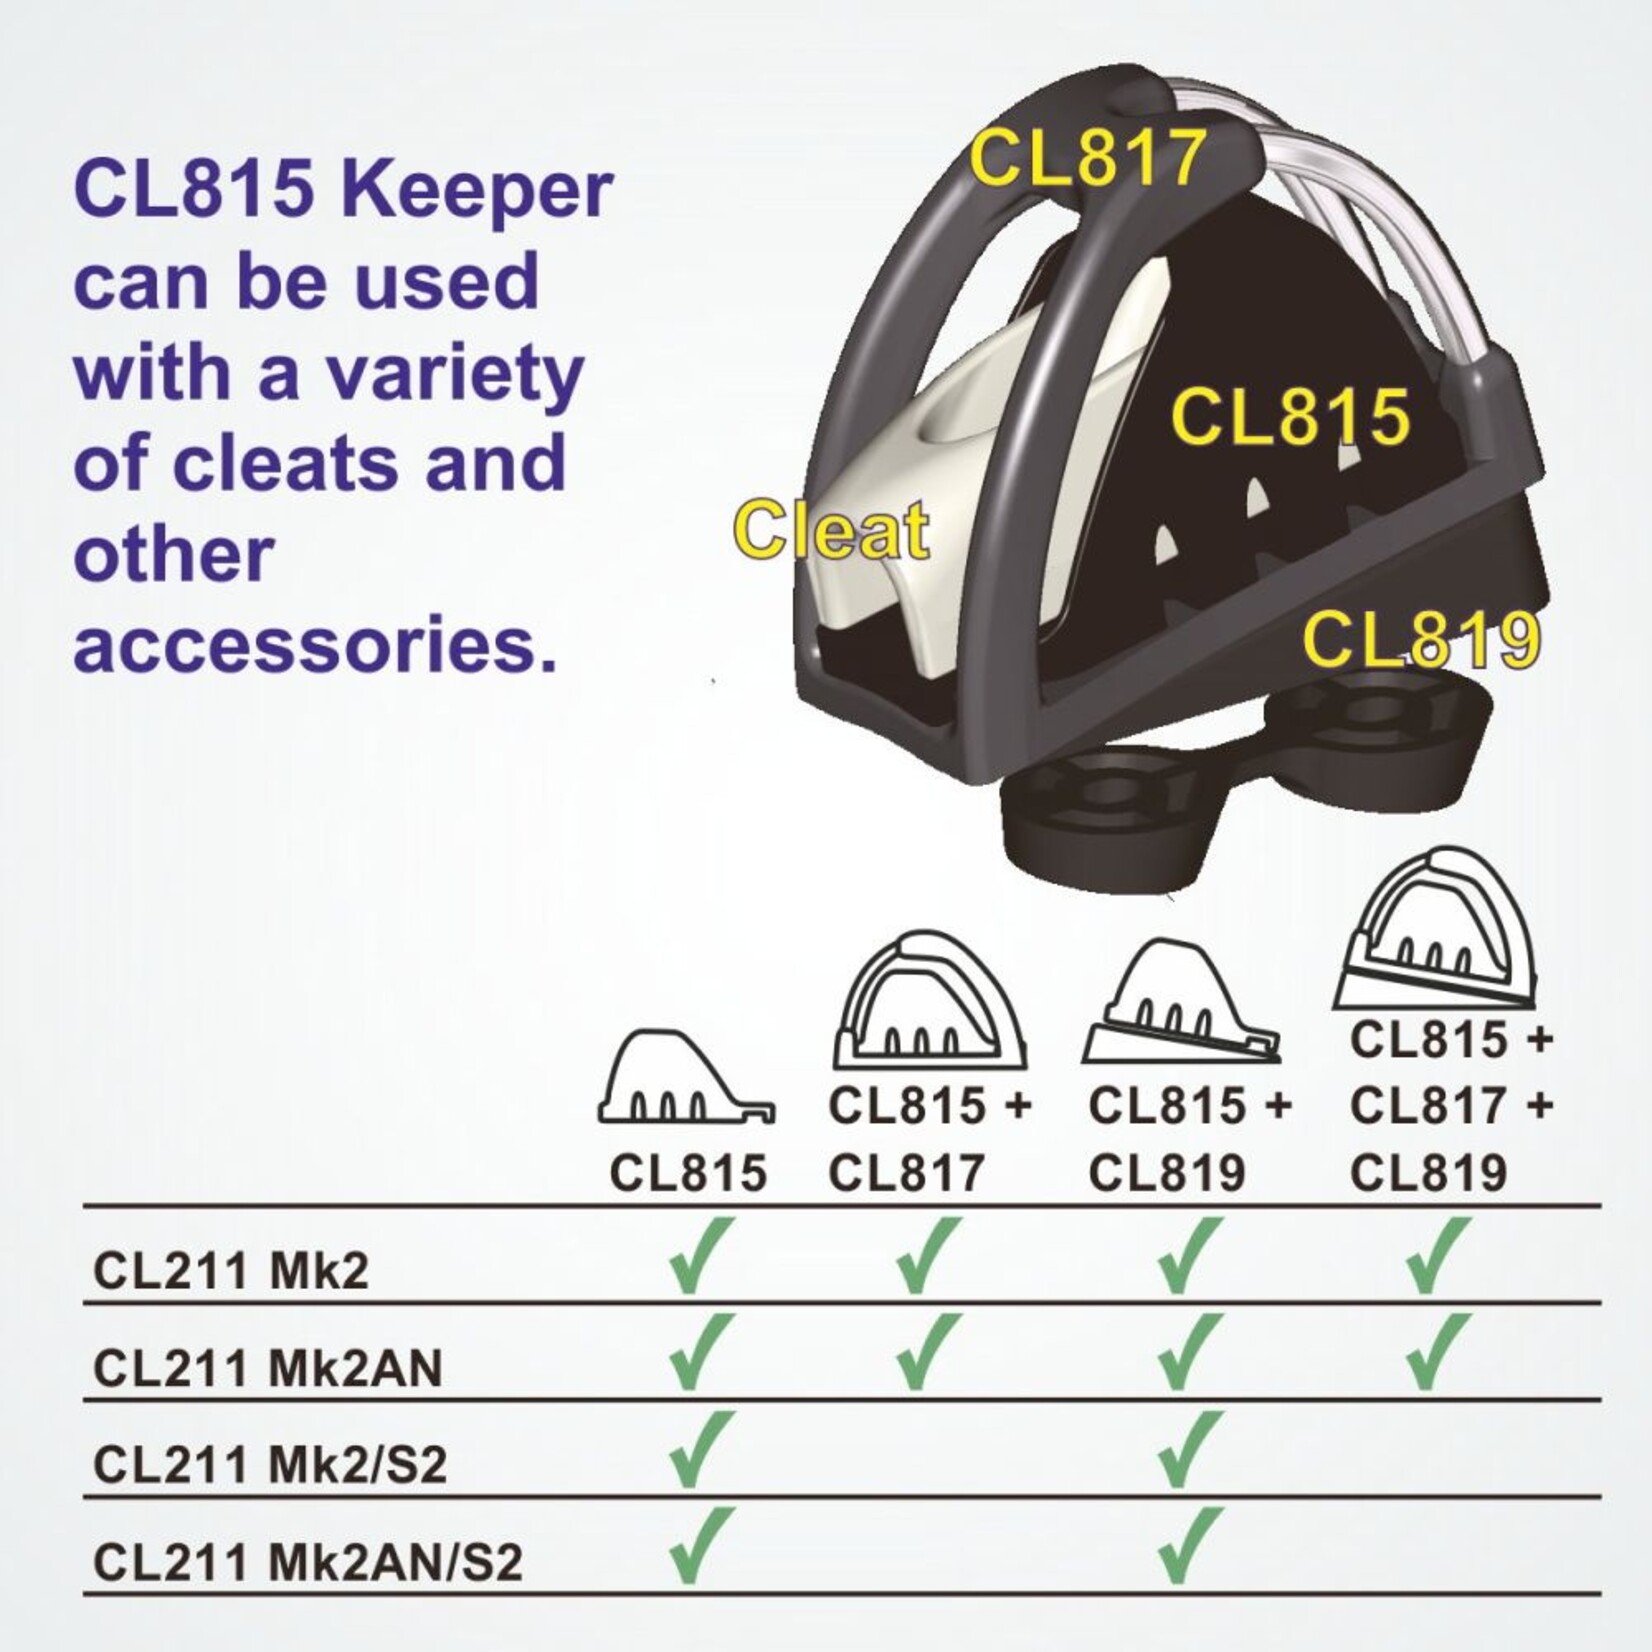 Clamcleat Keeper for CL211 MK2